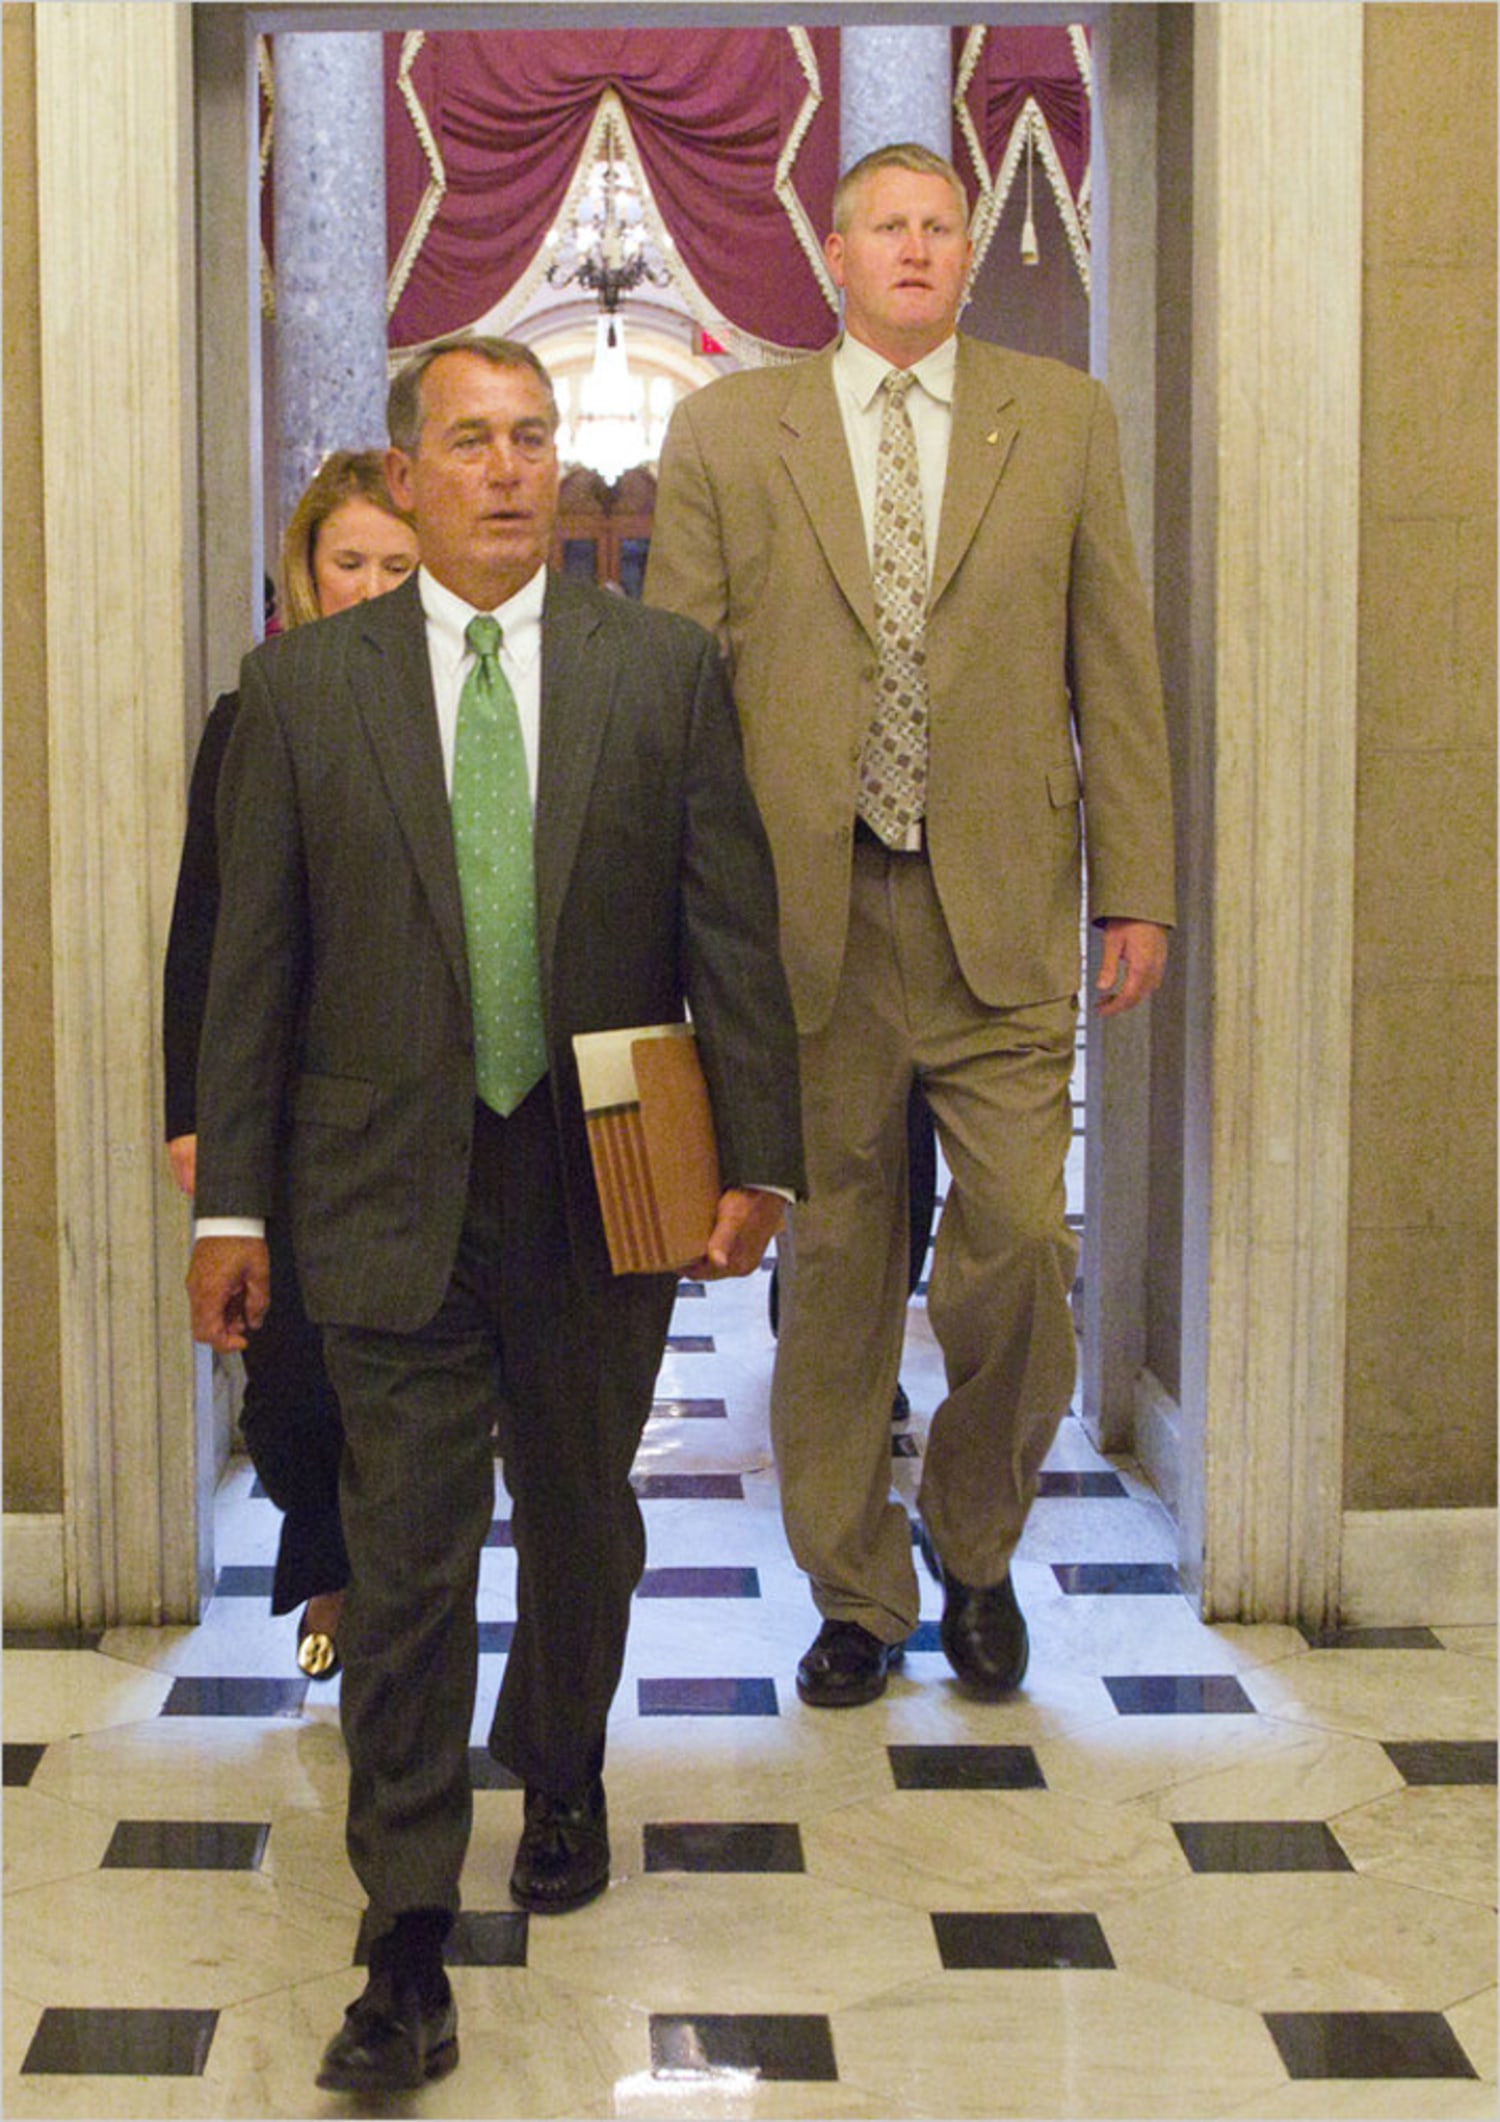 As Boehner ascends, his power comes with caveats